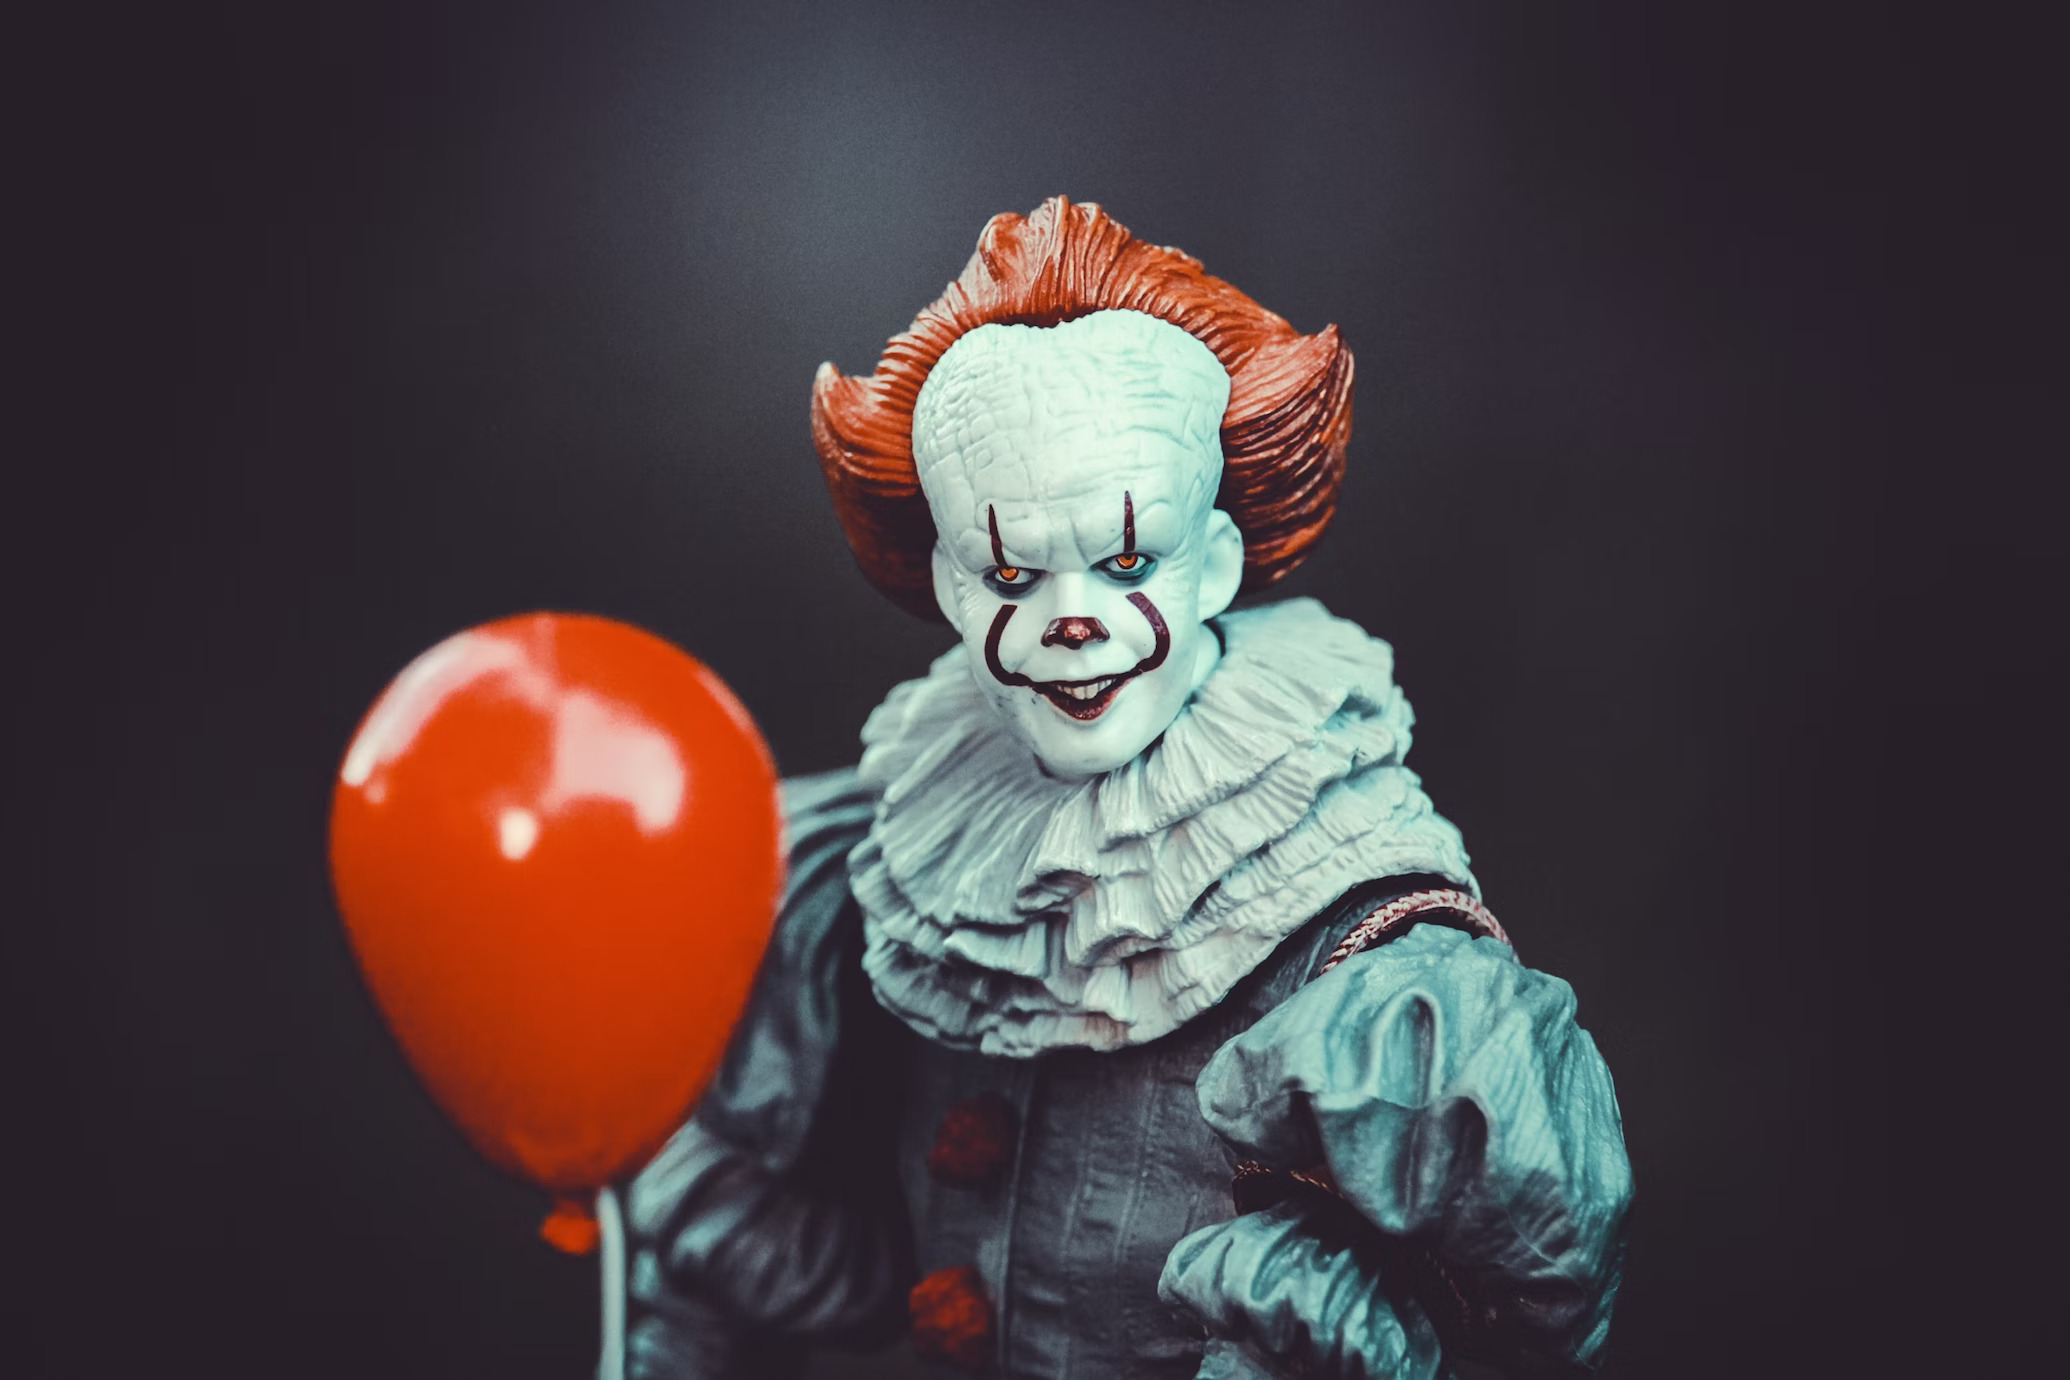 An illustration depicting the clown character from Stephen King&rsquo;s novel, It.